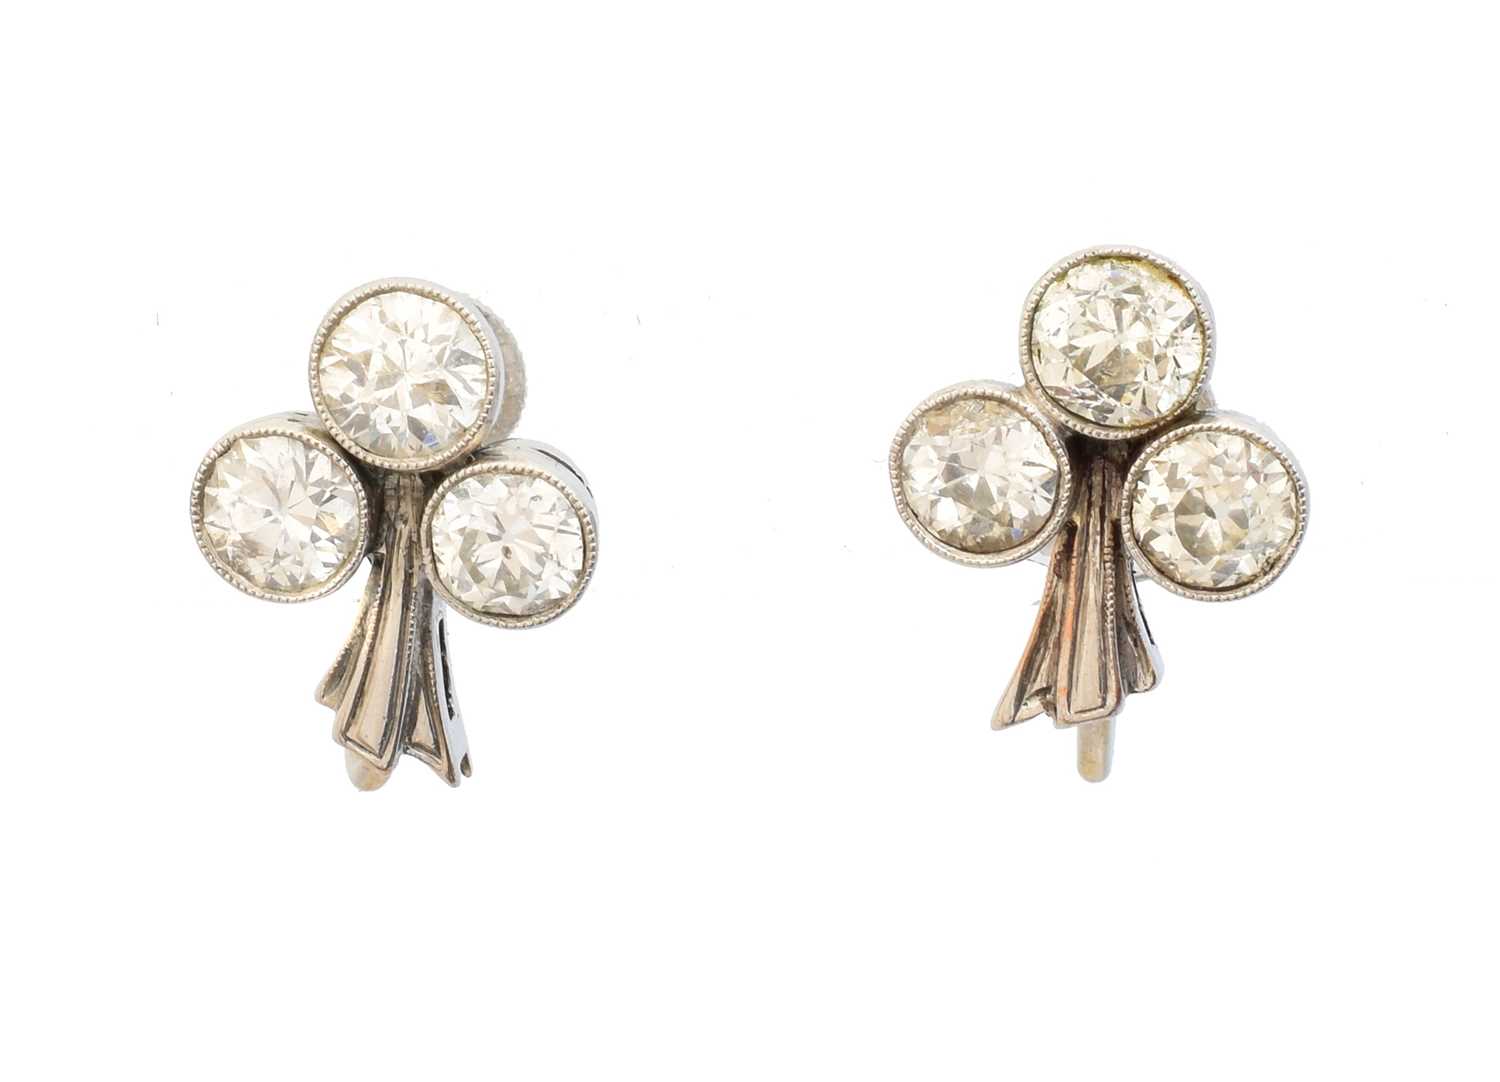 Lot 61 - A pair of early 20th century diamond earrings